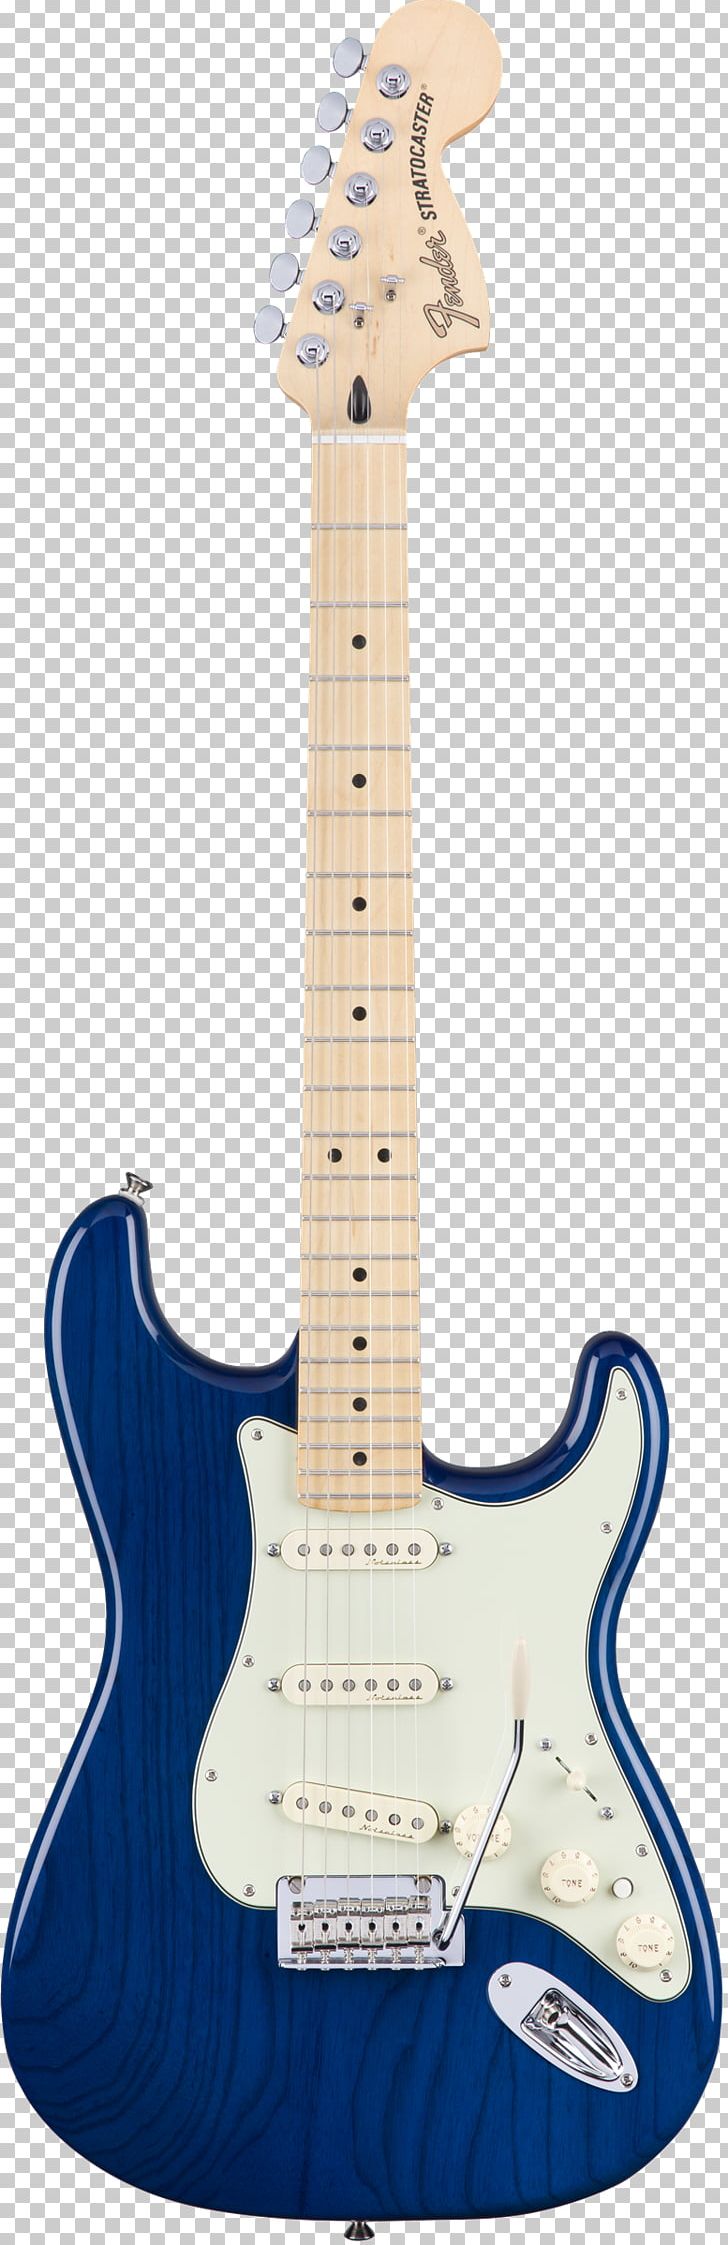 Fender Stratocaster Fender American Deluxe Series Fender Musical Instruments Corporation Electric Guitar PNG, Clipart, Acoustic Electric Guitar, Bass Guitar, Guitar, Guitar Accessory, Musical Instrument Free PNG Download